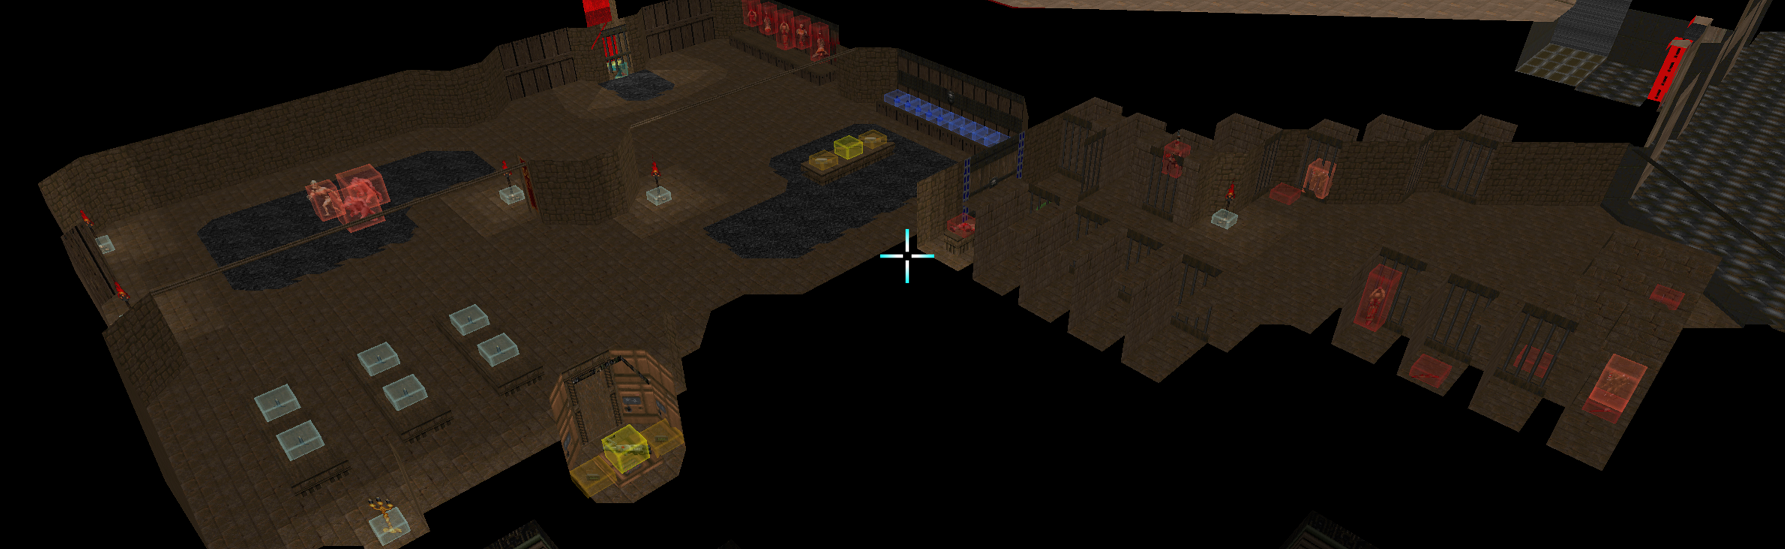 Editor view of the dungeon area